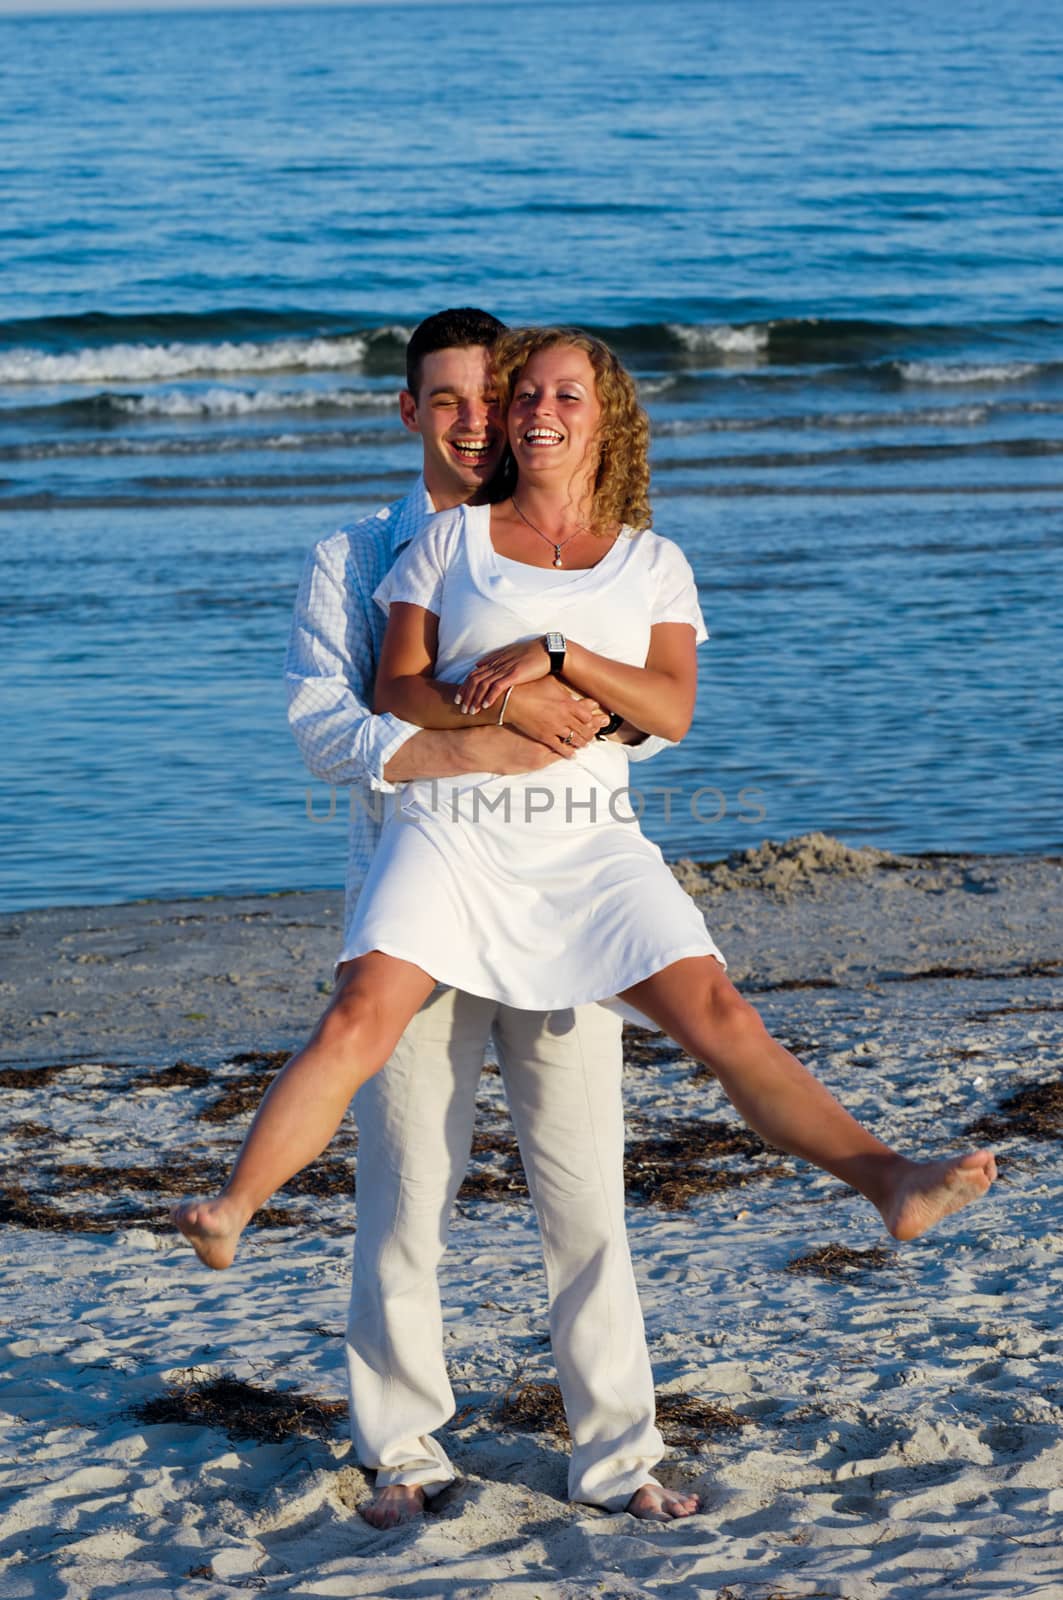 A happy woman and man in love at beach.